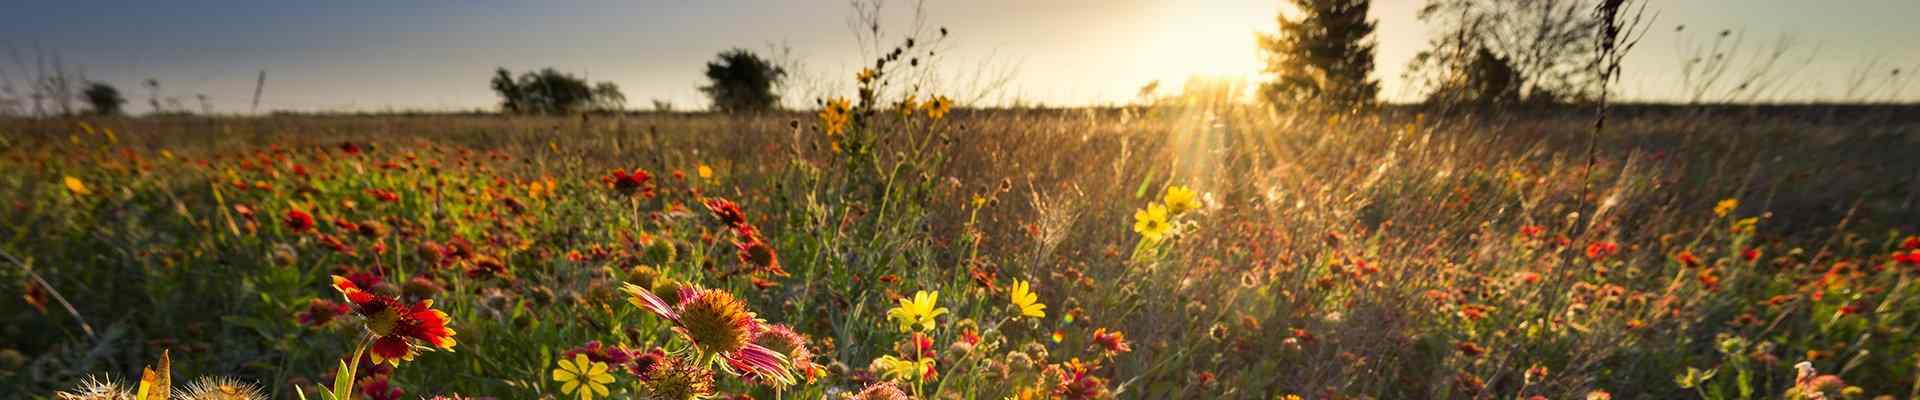 a field of flowers at sunset in haslet texas